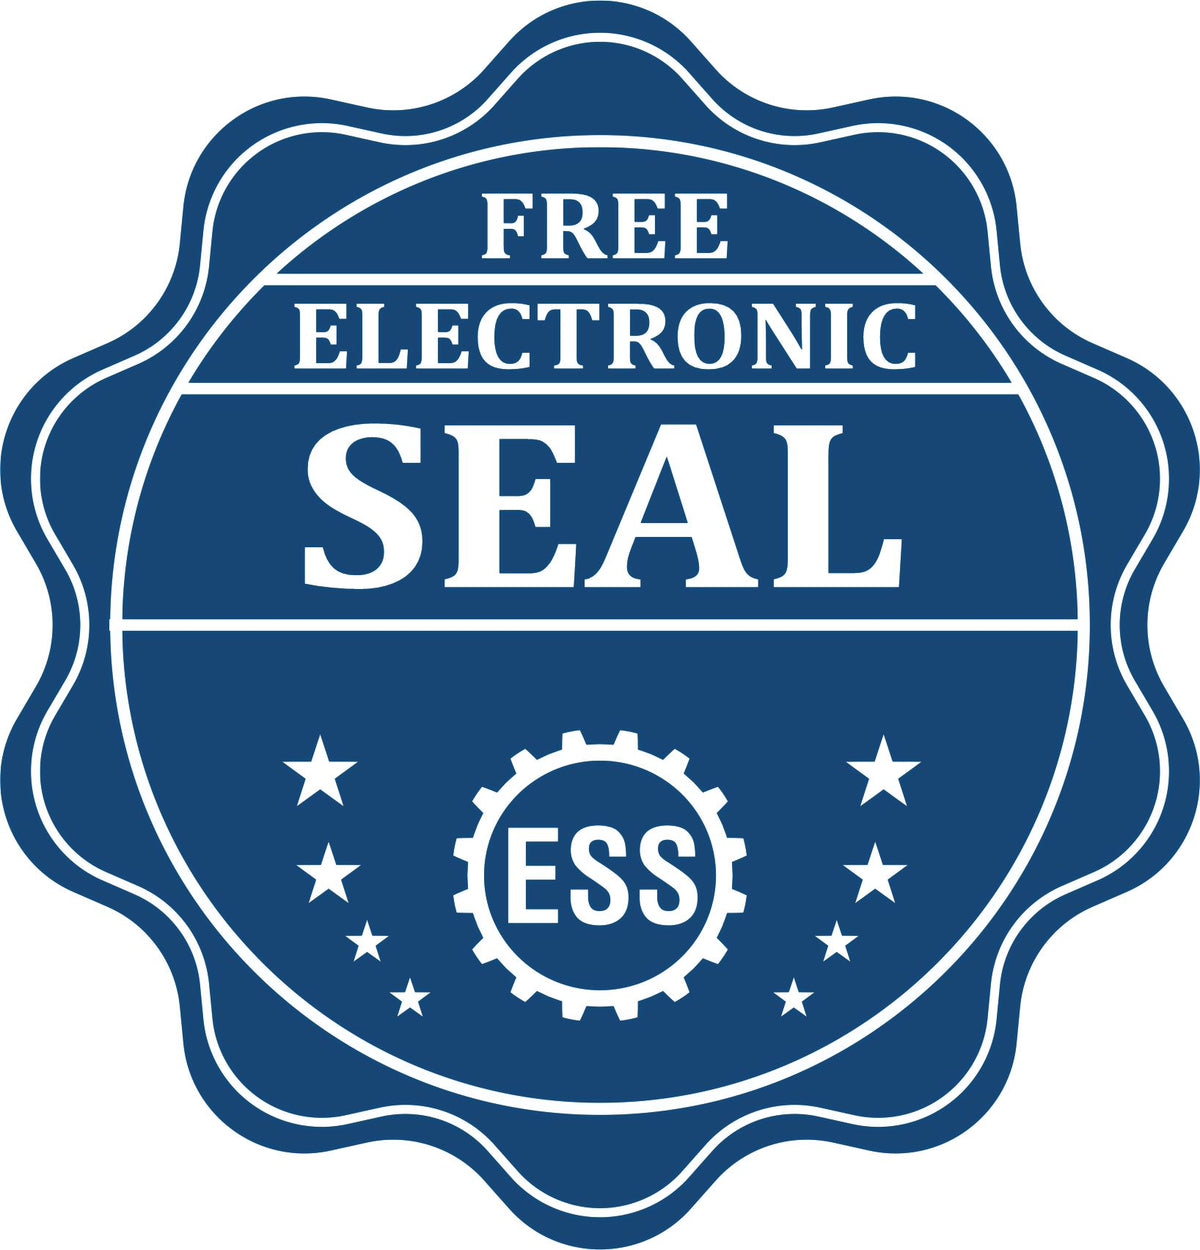 A badge showing a free electronic seal for the Premium MaxLight Pre-Inked Alabama Landscape Architectural Stamp with stars and the ESS gear on the emblem.